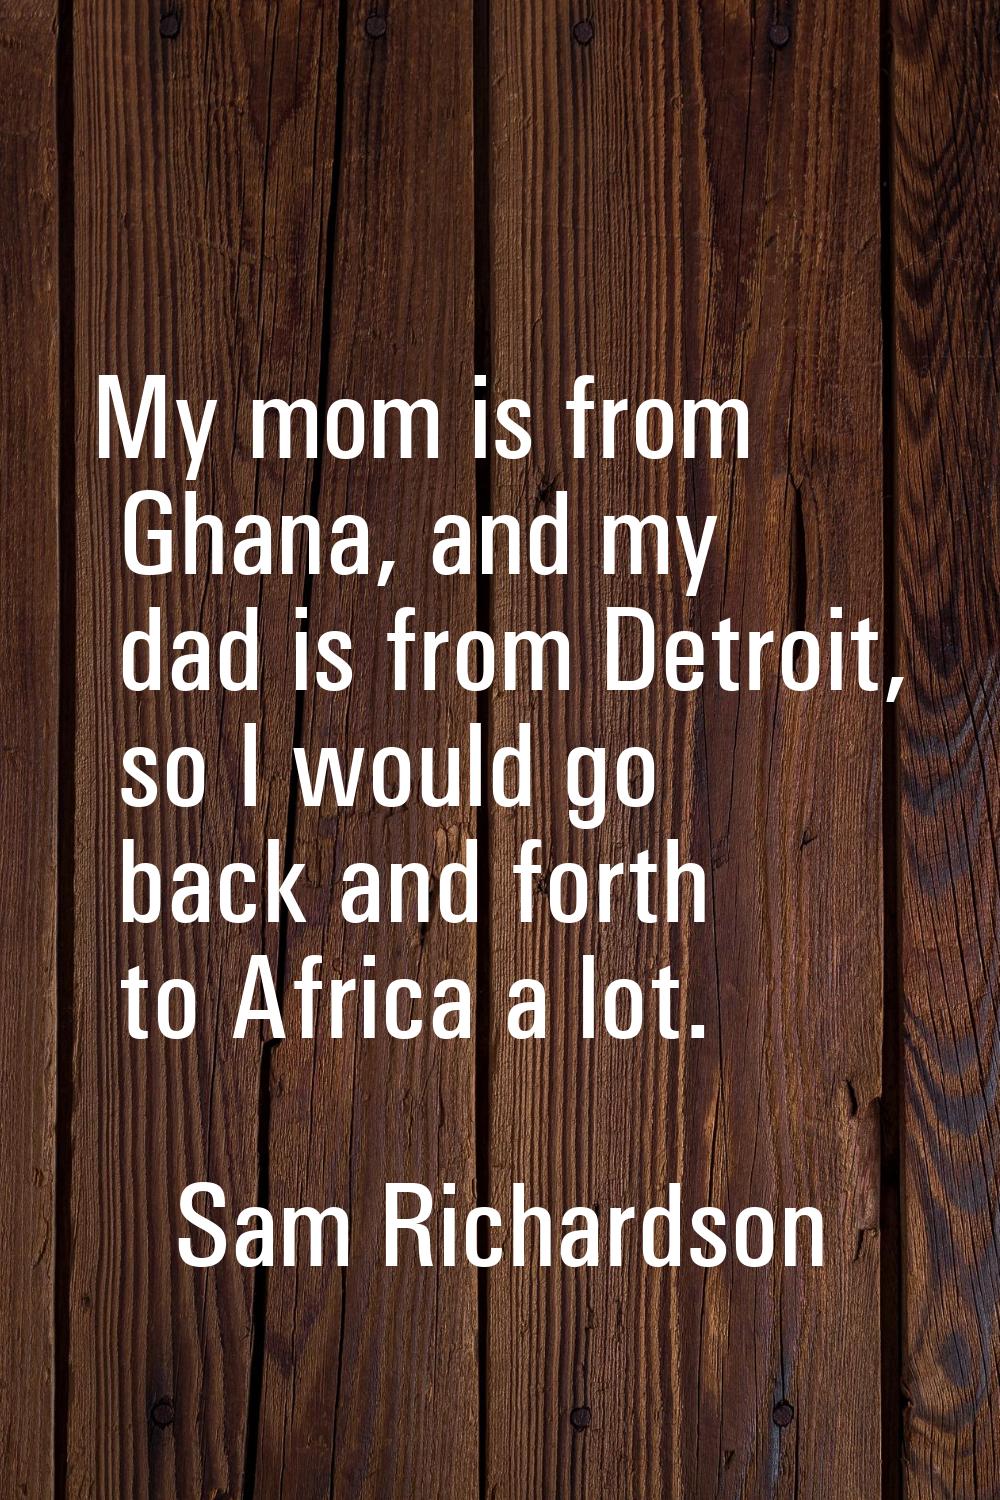 My mom is from Ghana, and my dad is from Detroit, so I would go back and forth to Africa a lot.